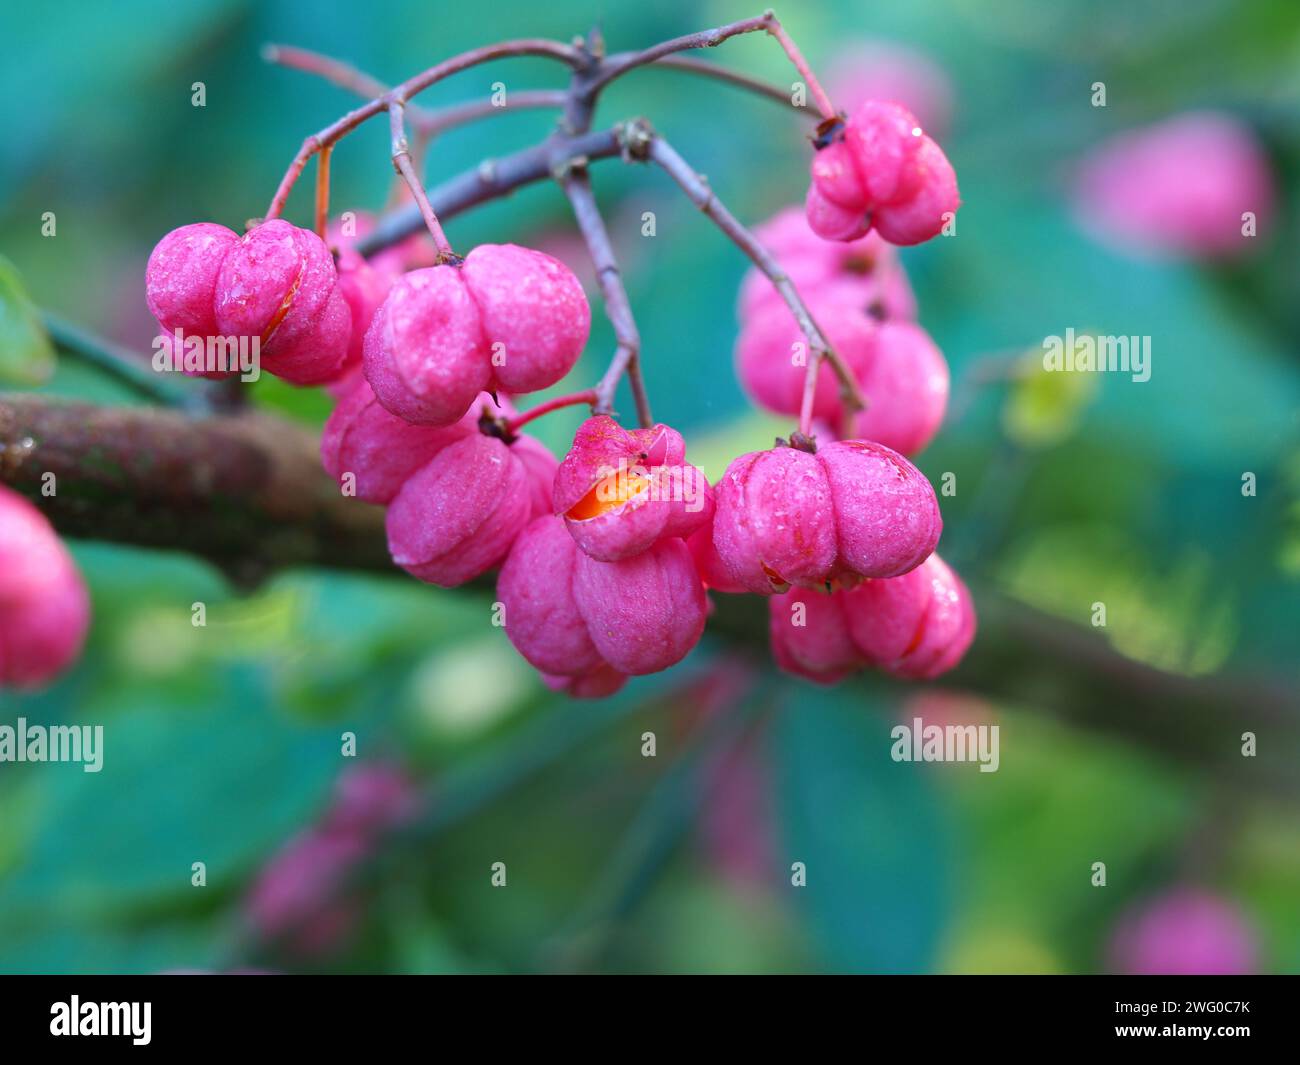 Beautiful pink berries of the spindle tree Euonymus europaea Stock Photo